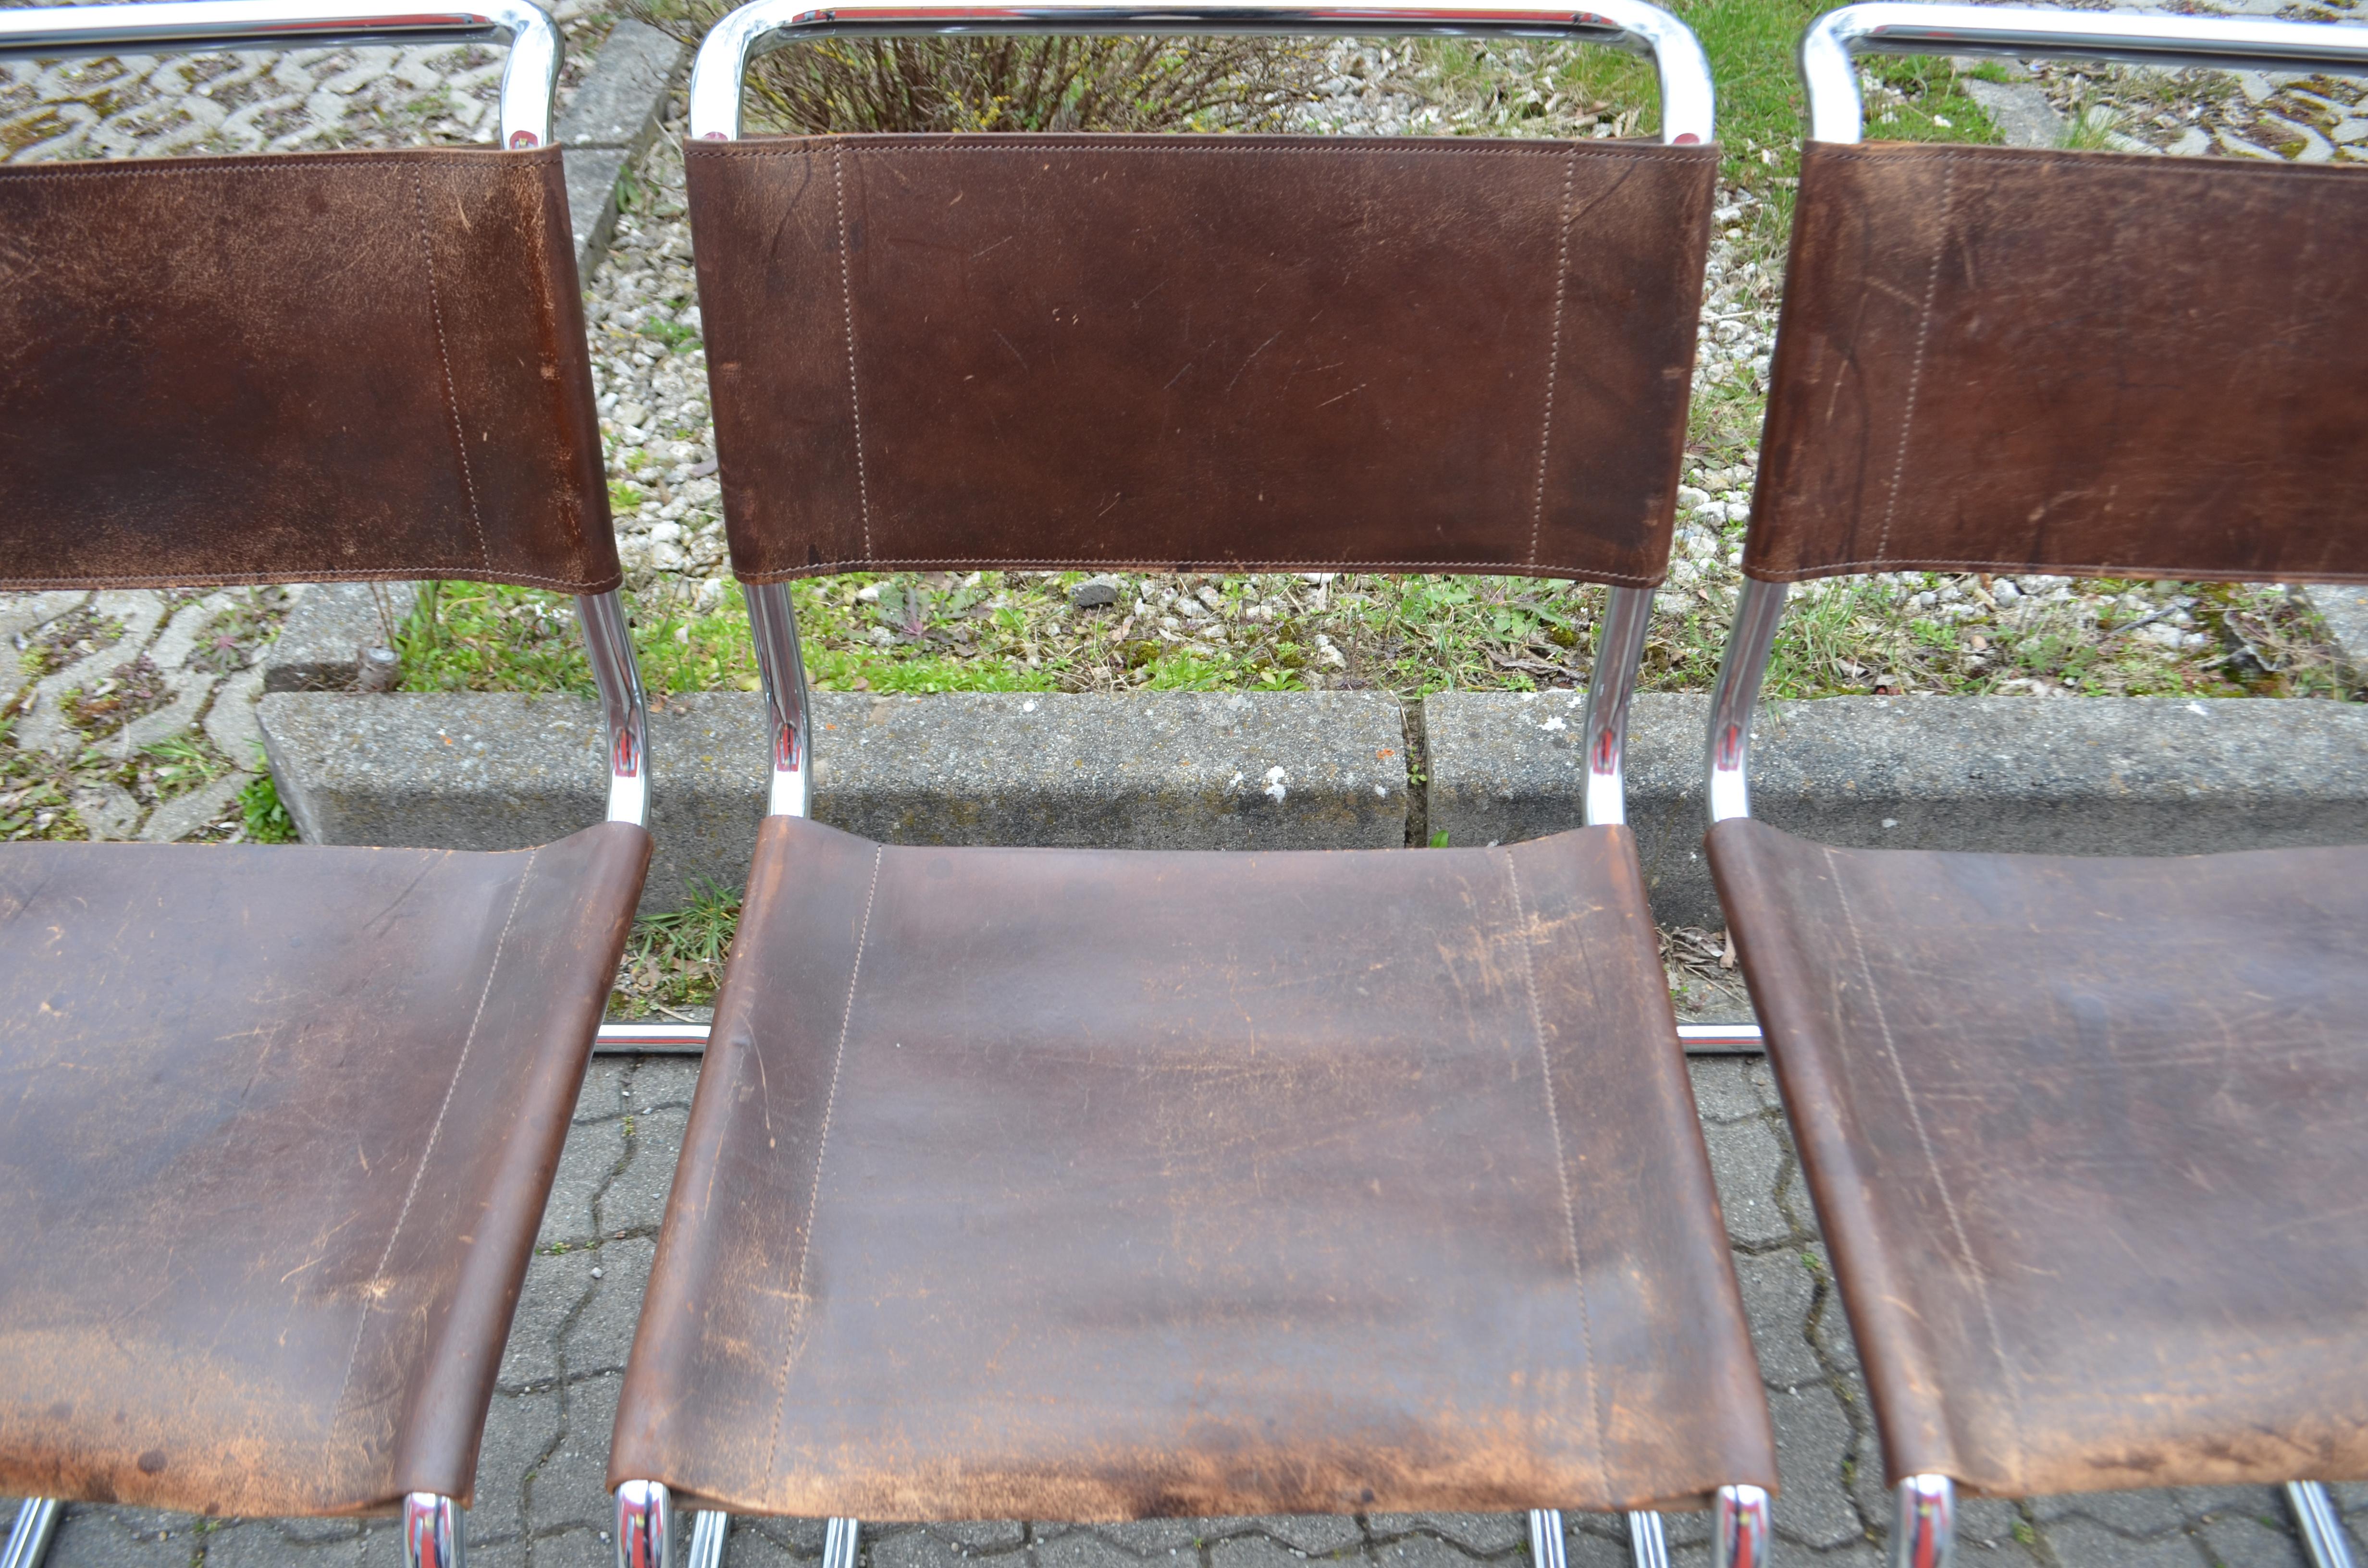 Thonet S 33 Vintage Brown Leather Chairs Mart Stam Cantilever Set of 10 For Sale 1